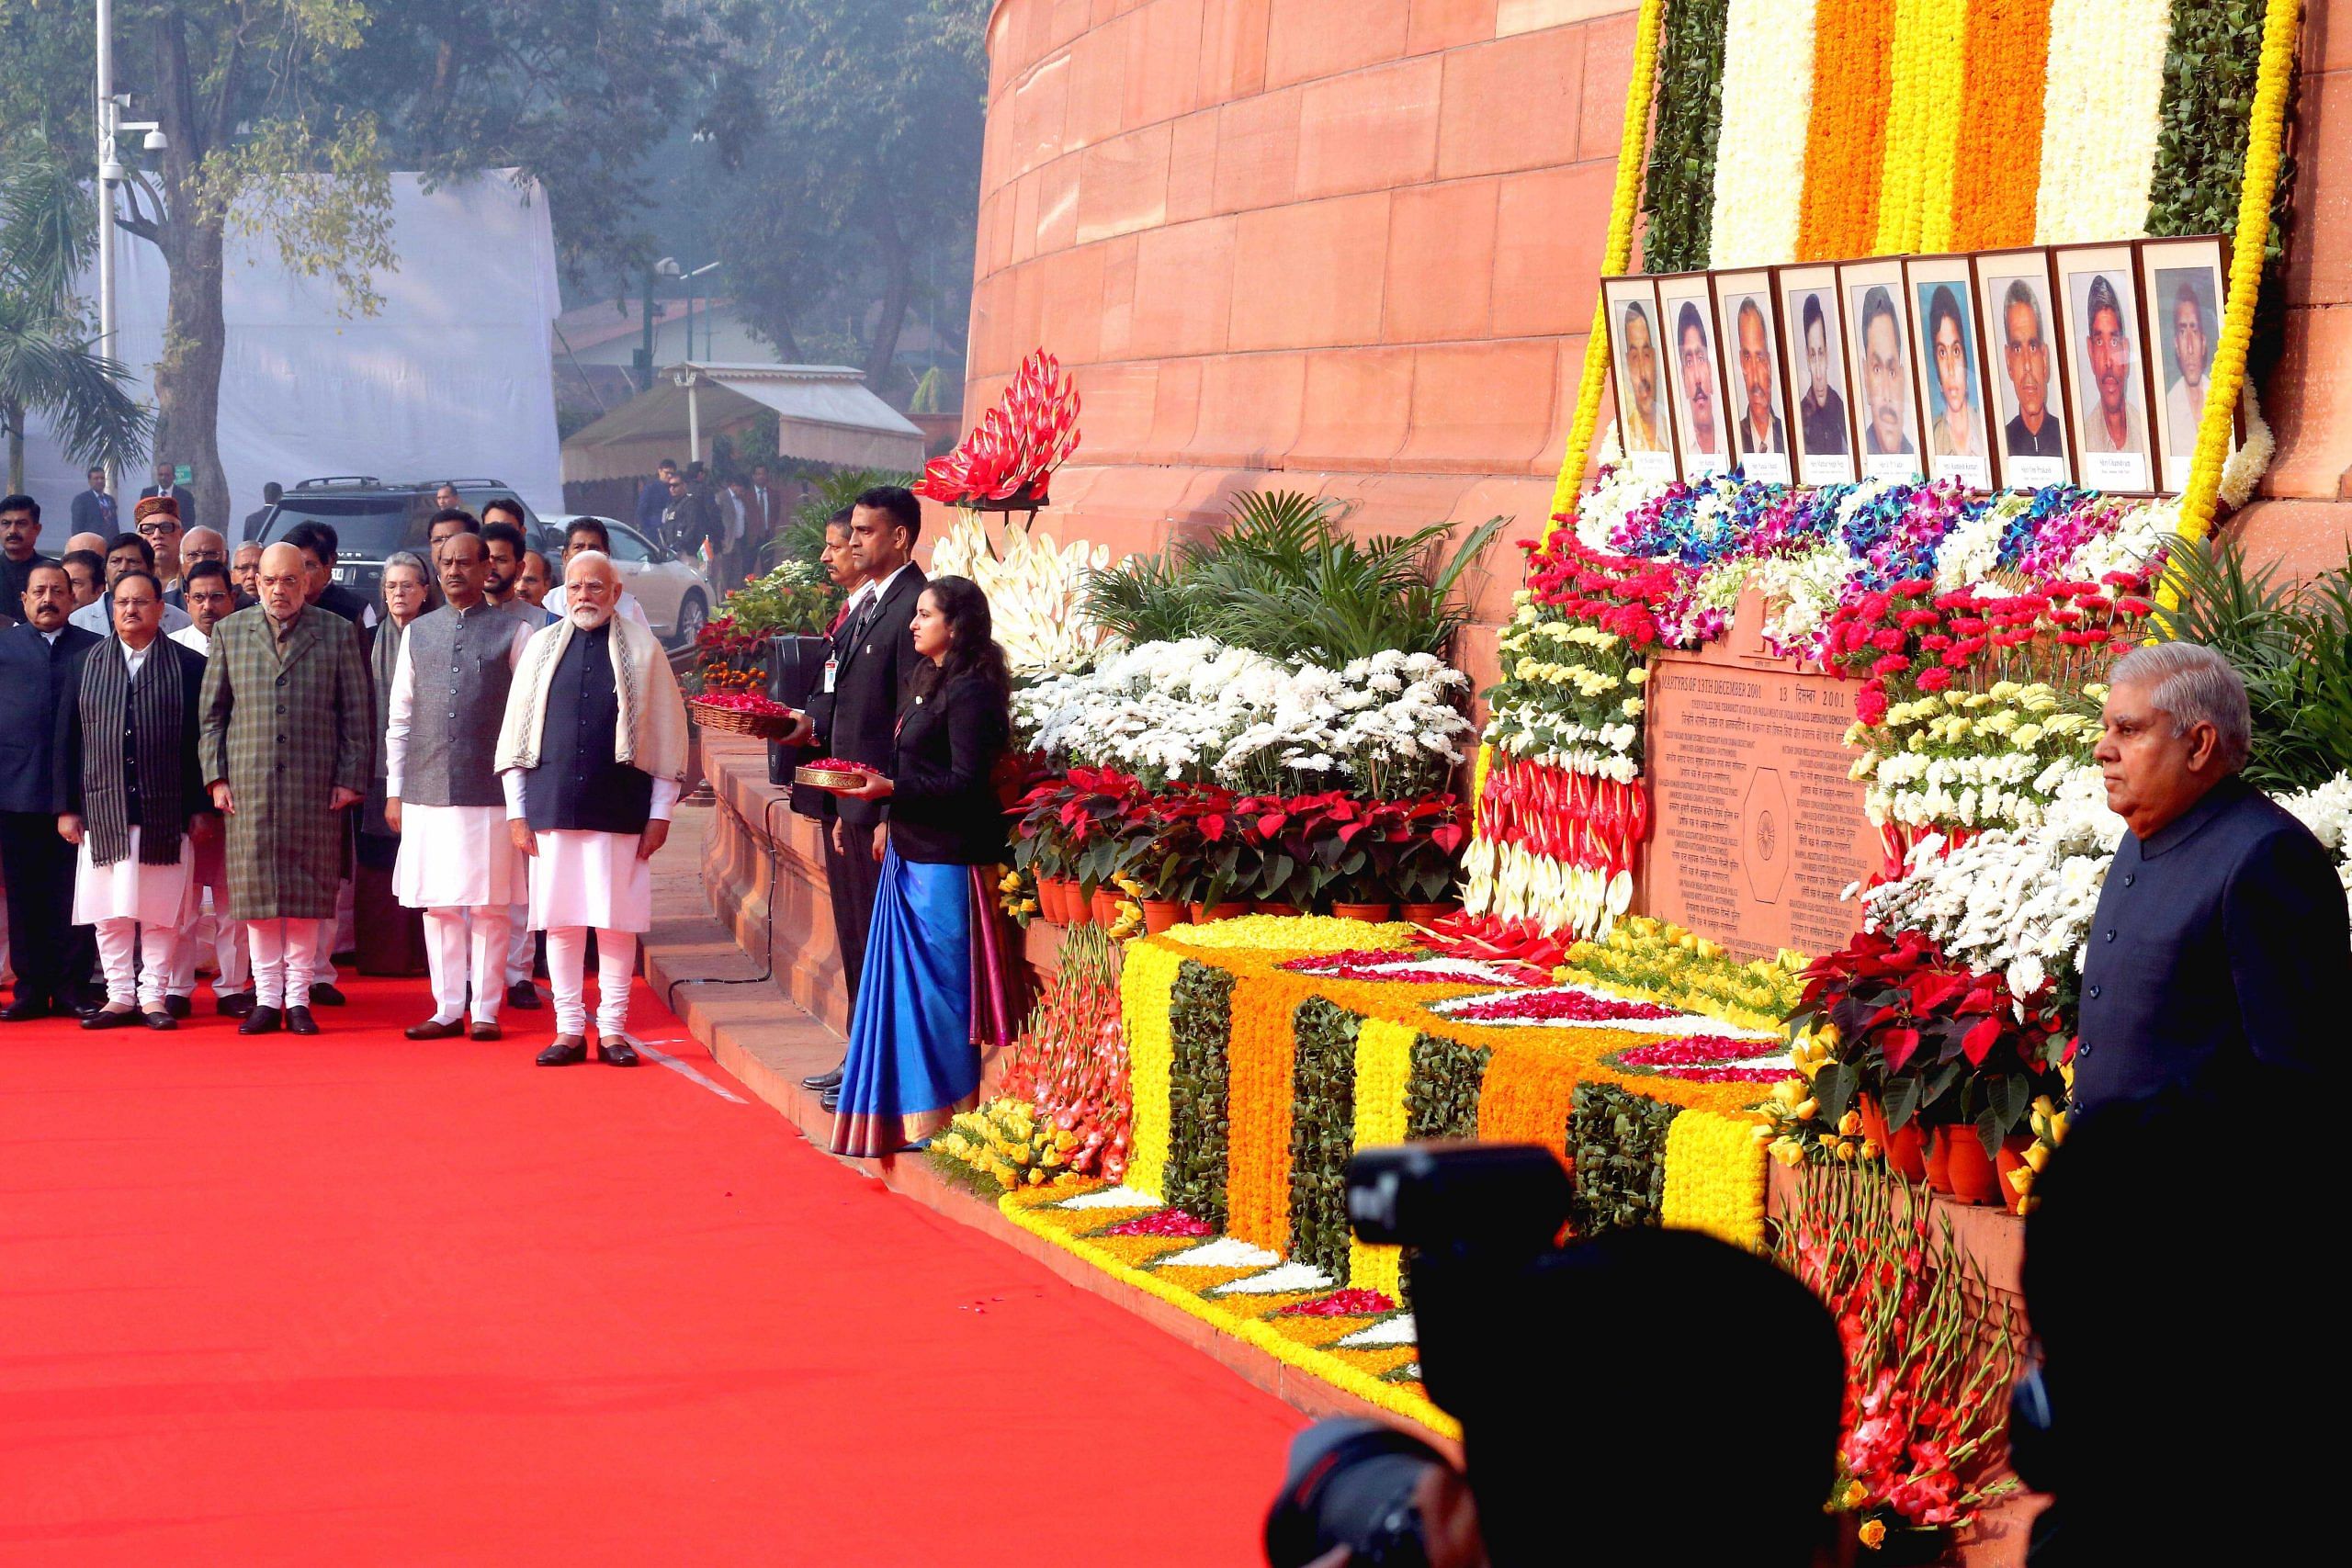 Vice-President Jagdeep Dhankhar, Lok Sabha Speaker Om Birla, PM Narendra Modi, Union Home Minister Amit Shah, BJP National President JP Nadda, Congress President Mallikarjun Kharge, Congress leader Sonia Gandhi and others senior leaders during a tribute ceremony to pay homage to those who lost their lives in the 2001 Parliament attack | Praveen Jain | ThePrint